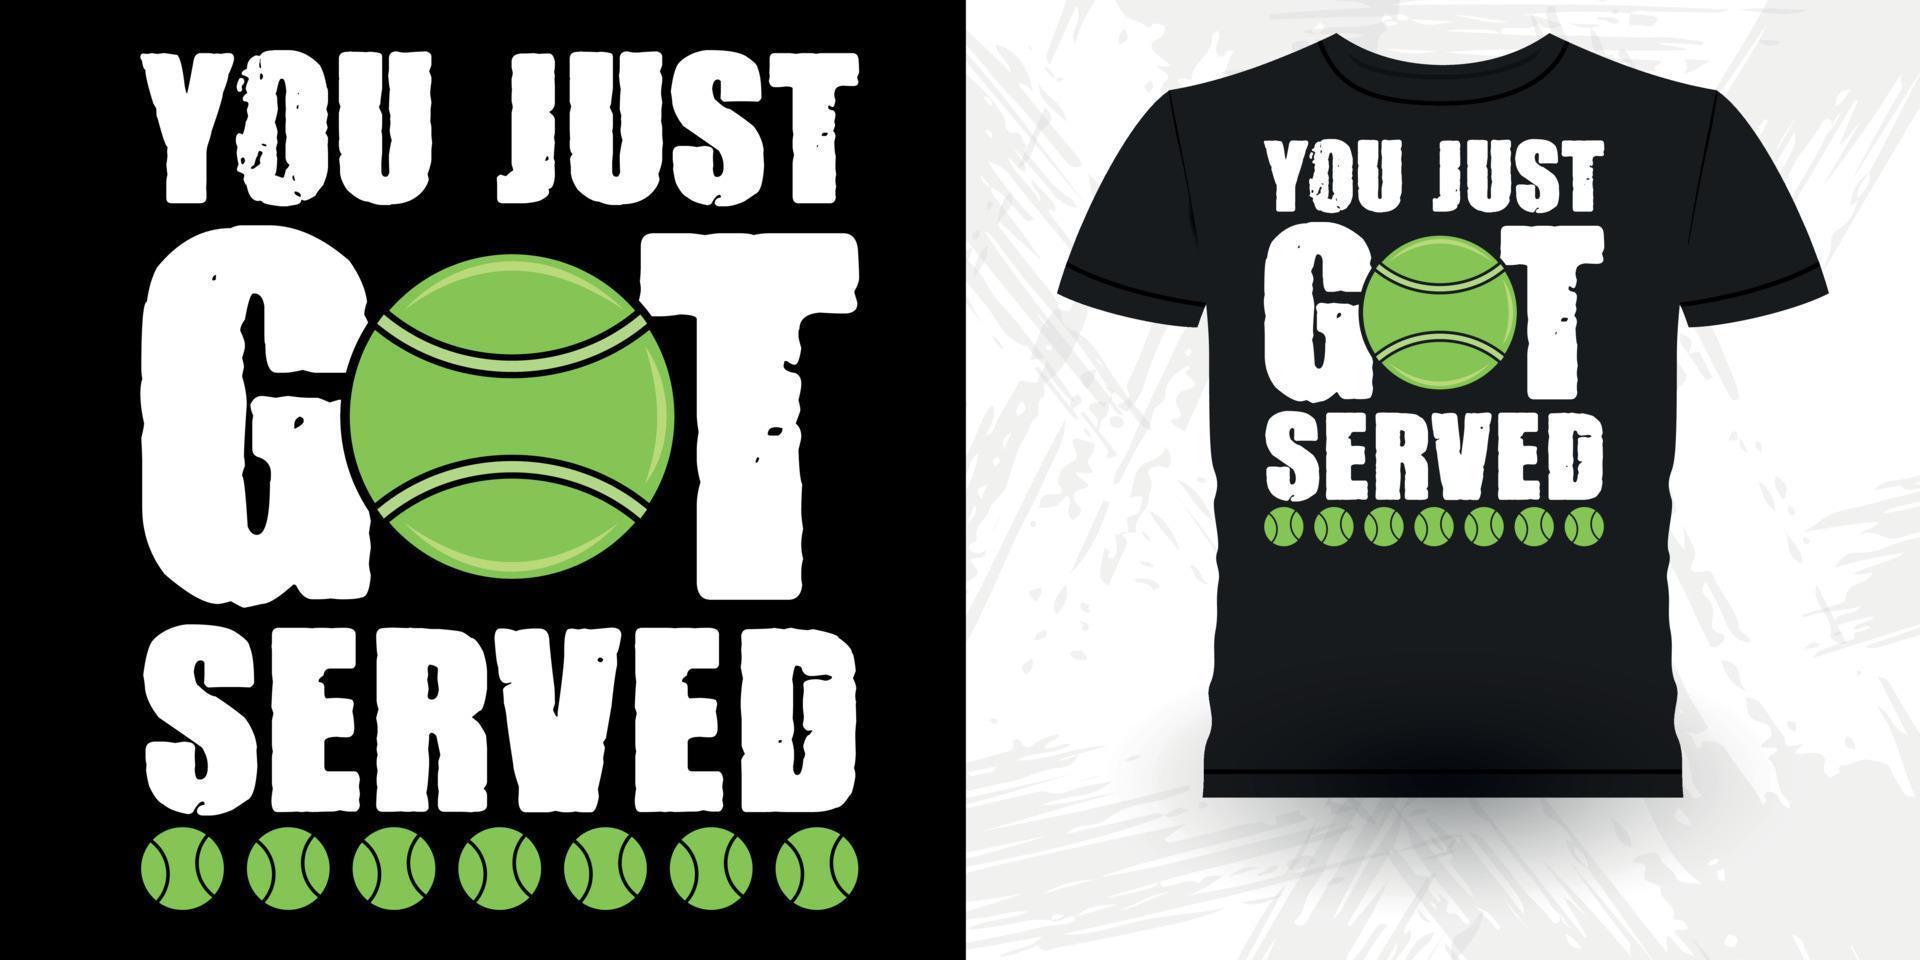 You Just Got Served Funny Tennis Players Retro Vintage Tennis T-shirt Design vector